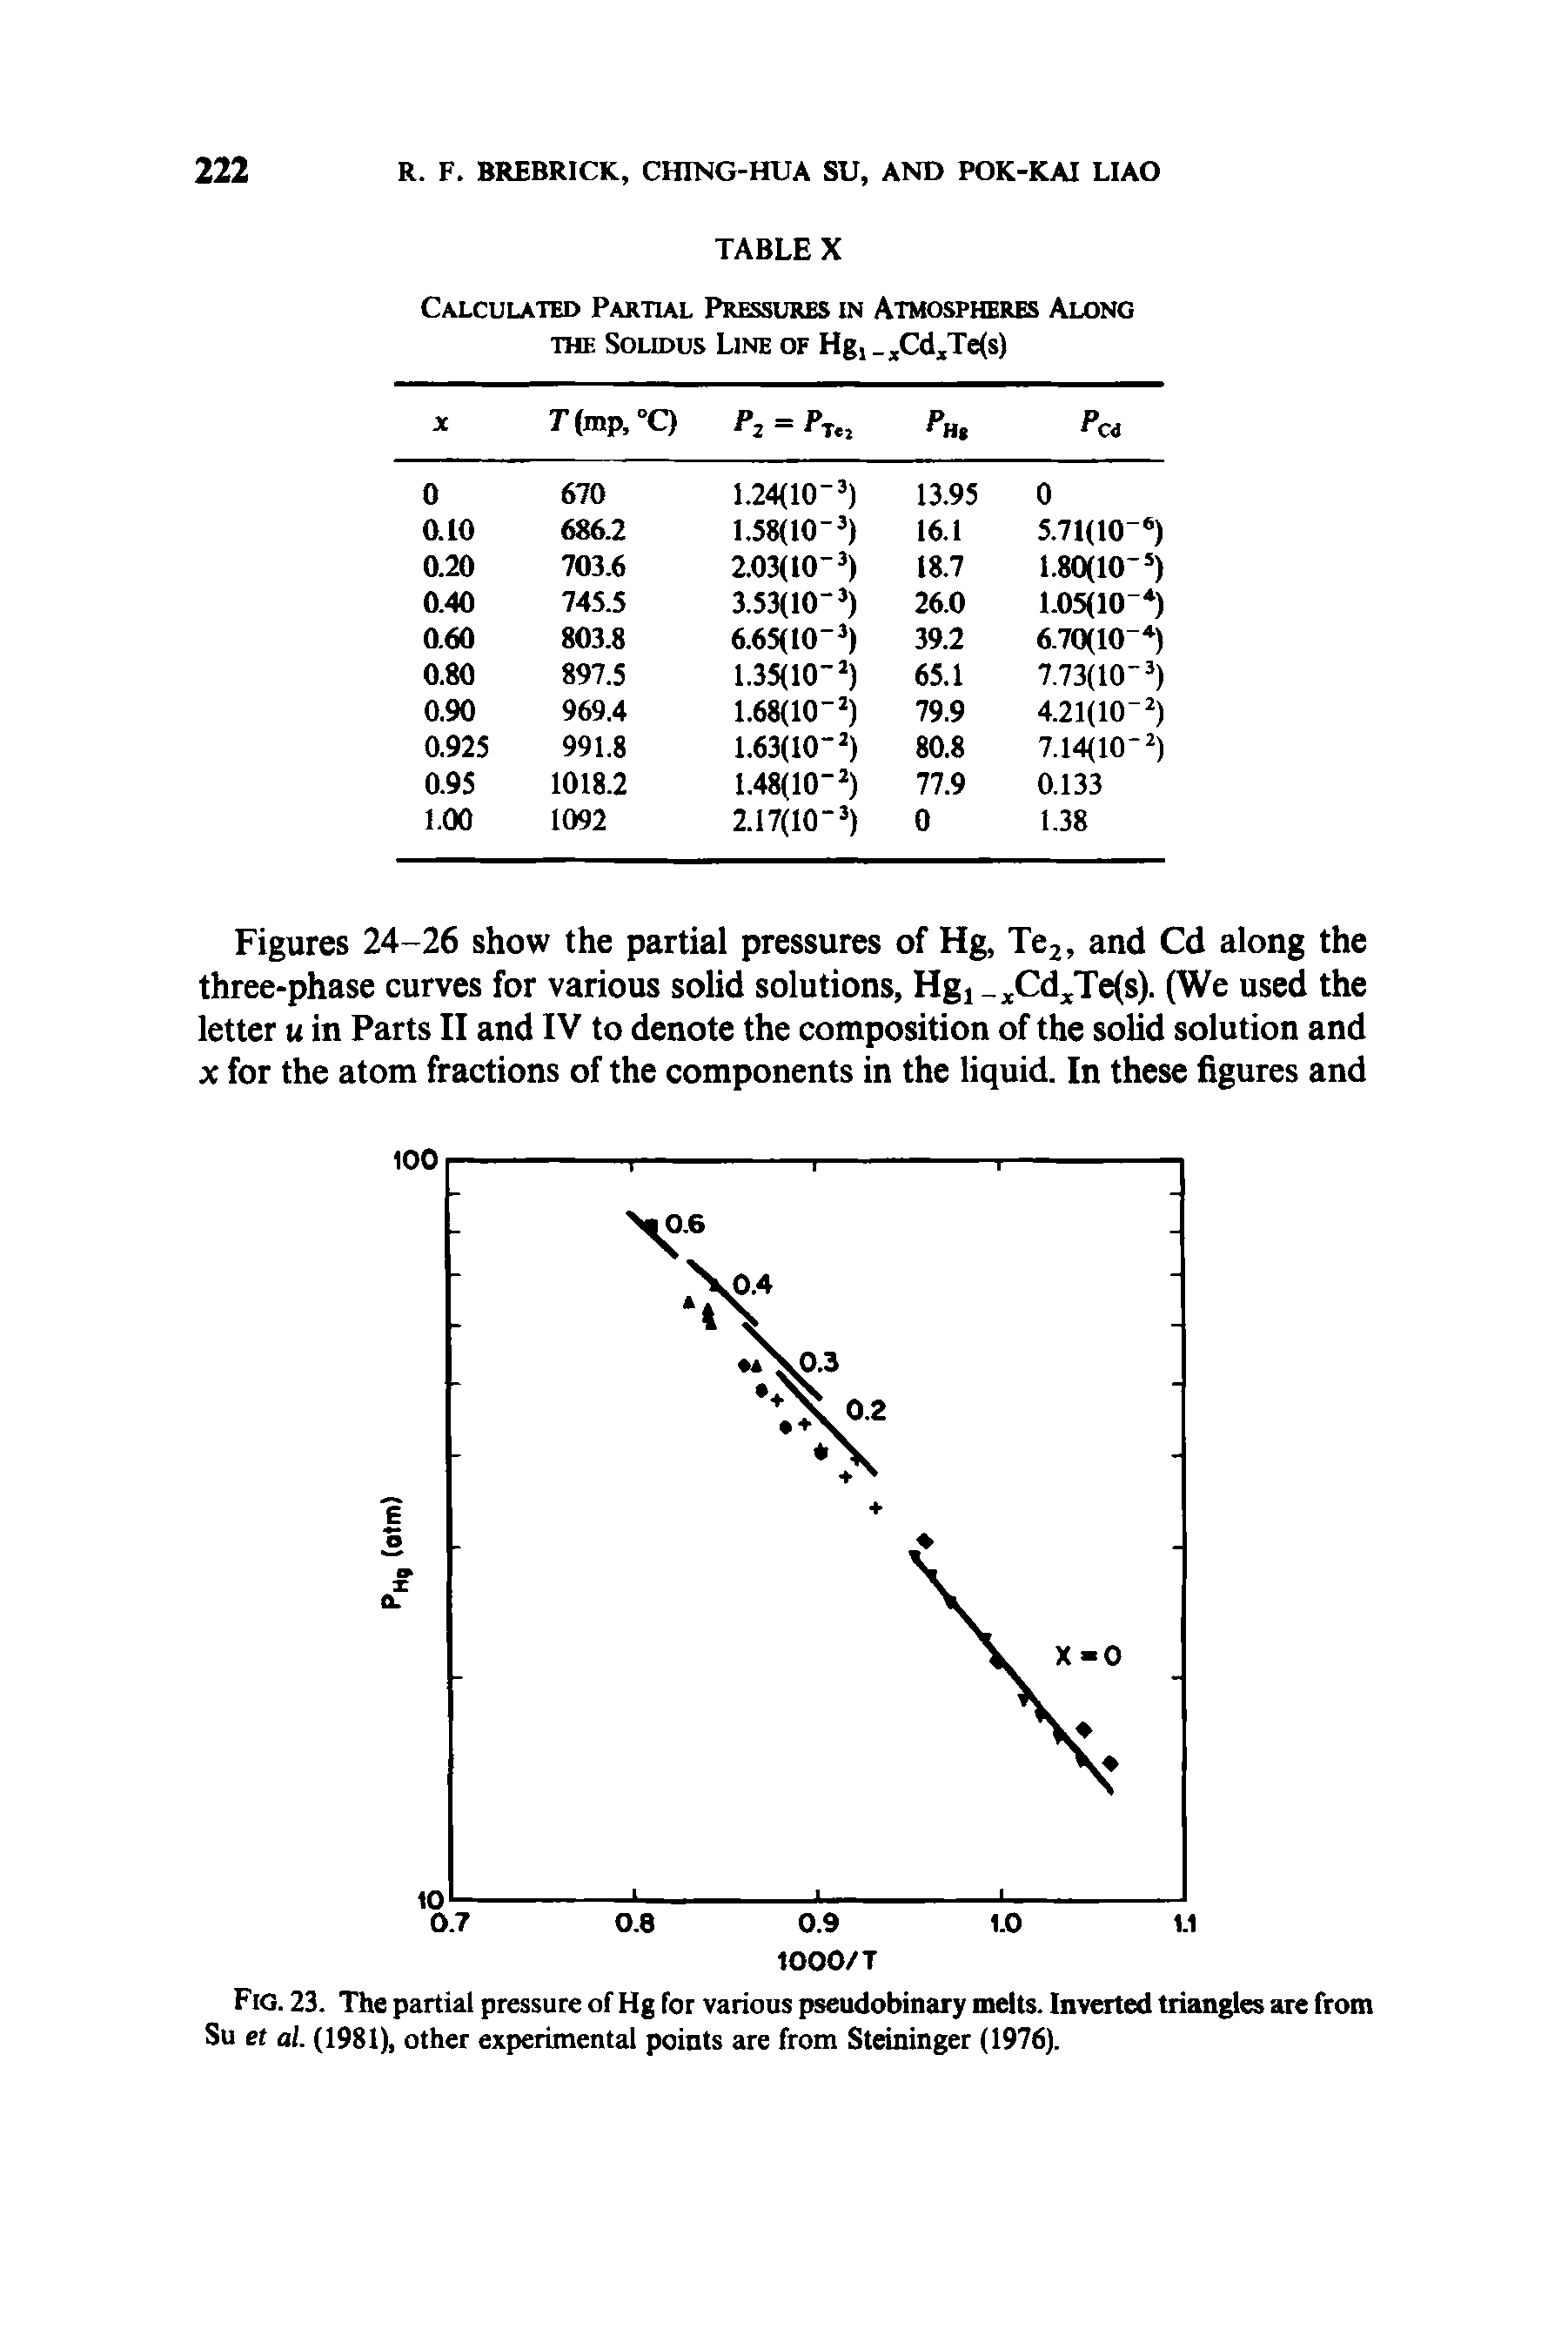 Figures 24-26 show the partial pressures of Hg, Te2, and Cd along the three-phase curves for various solid solutions, Hgj xCdxTe(s). (We used the letter u in Parts II and IV to denote the composition of the solid solution and x for the atom fractions of the components in the liquid. In these figures and...